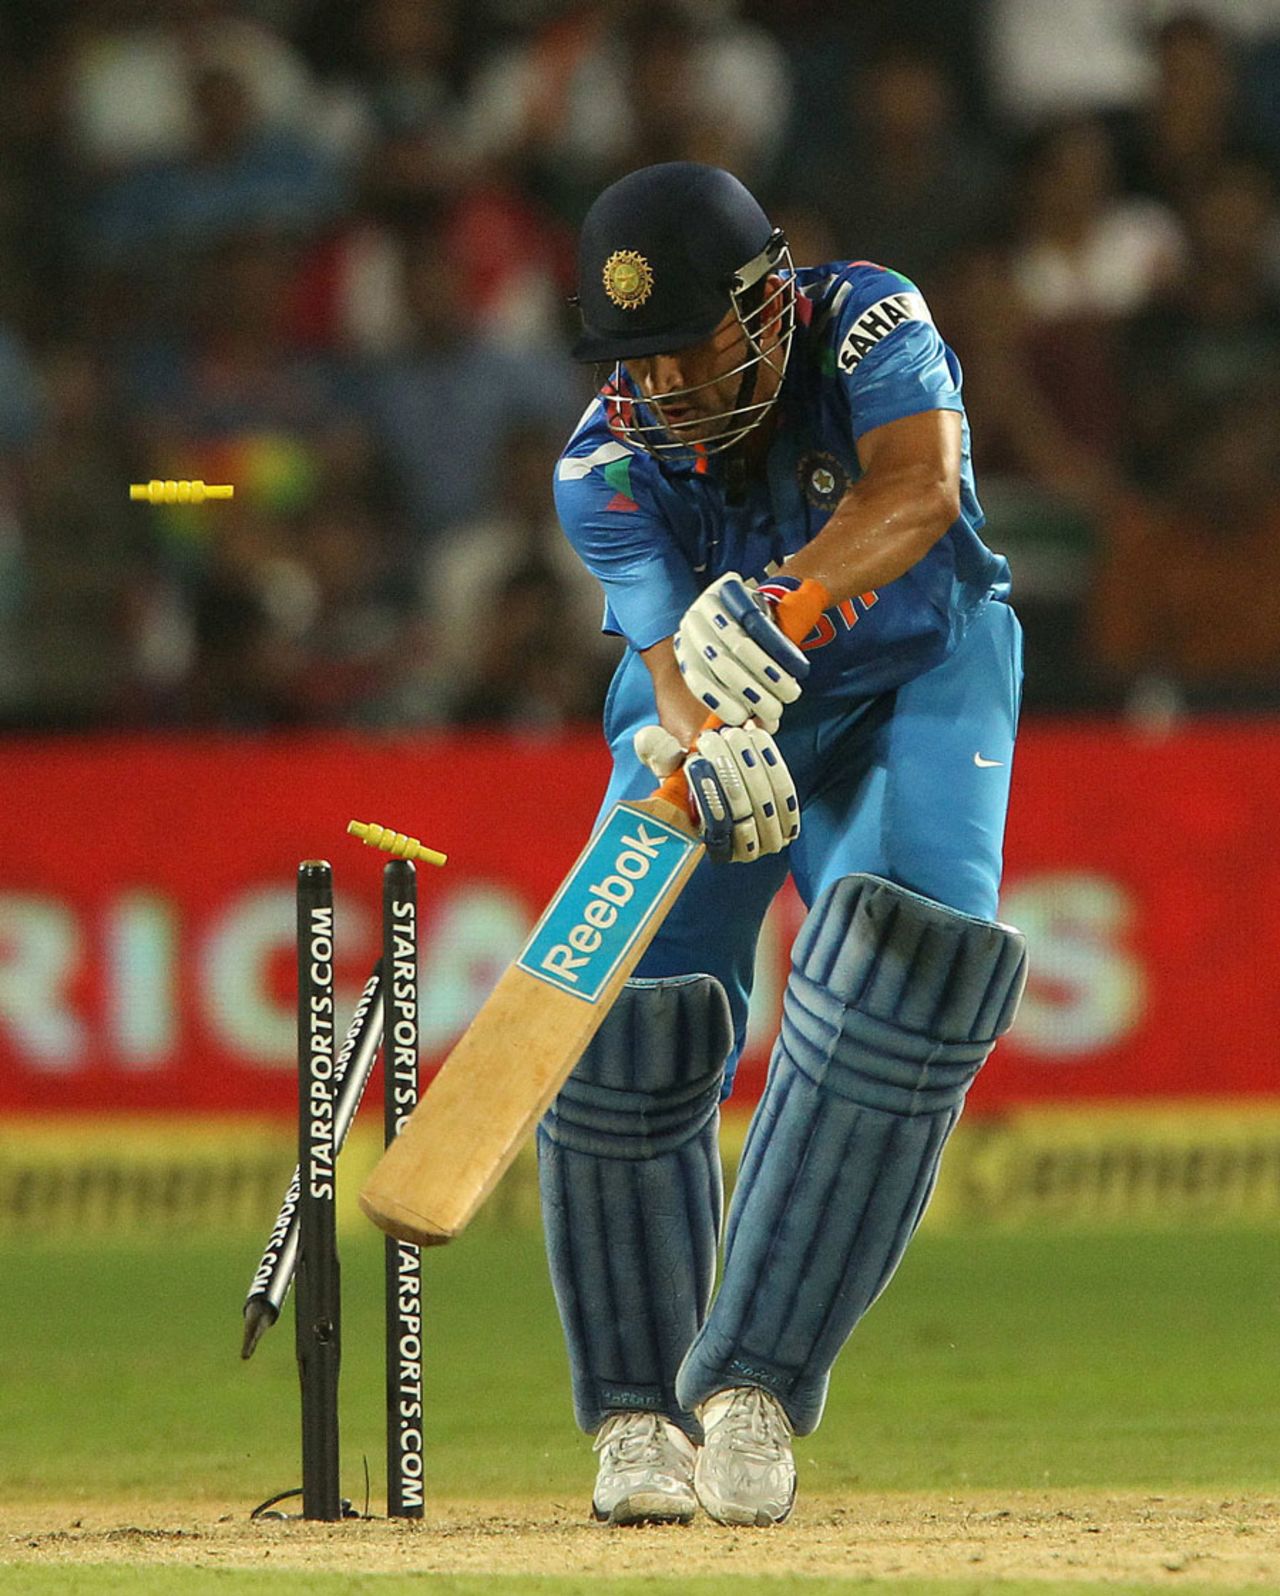 MS Dhoni was bowled by Clint McKay, India v Australia, 1st ODI, Pune, October 13, 2013